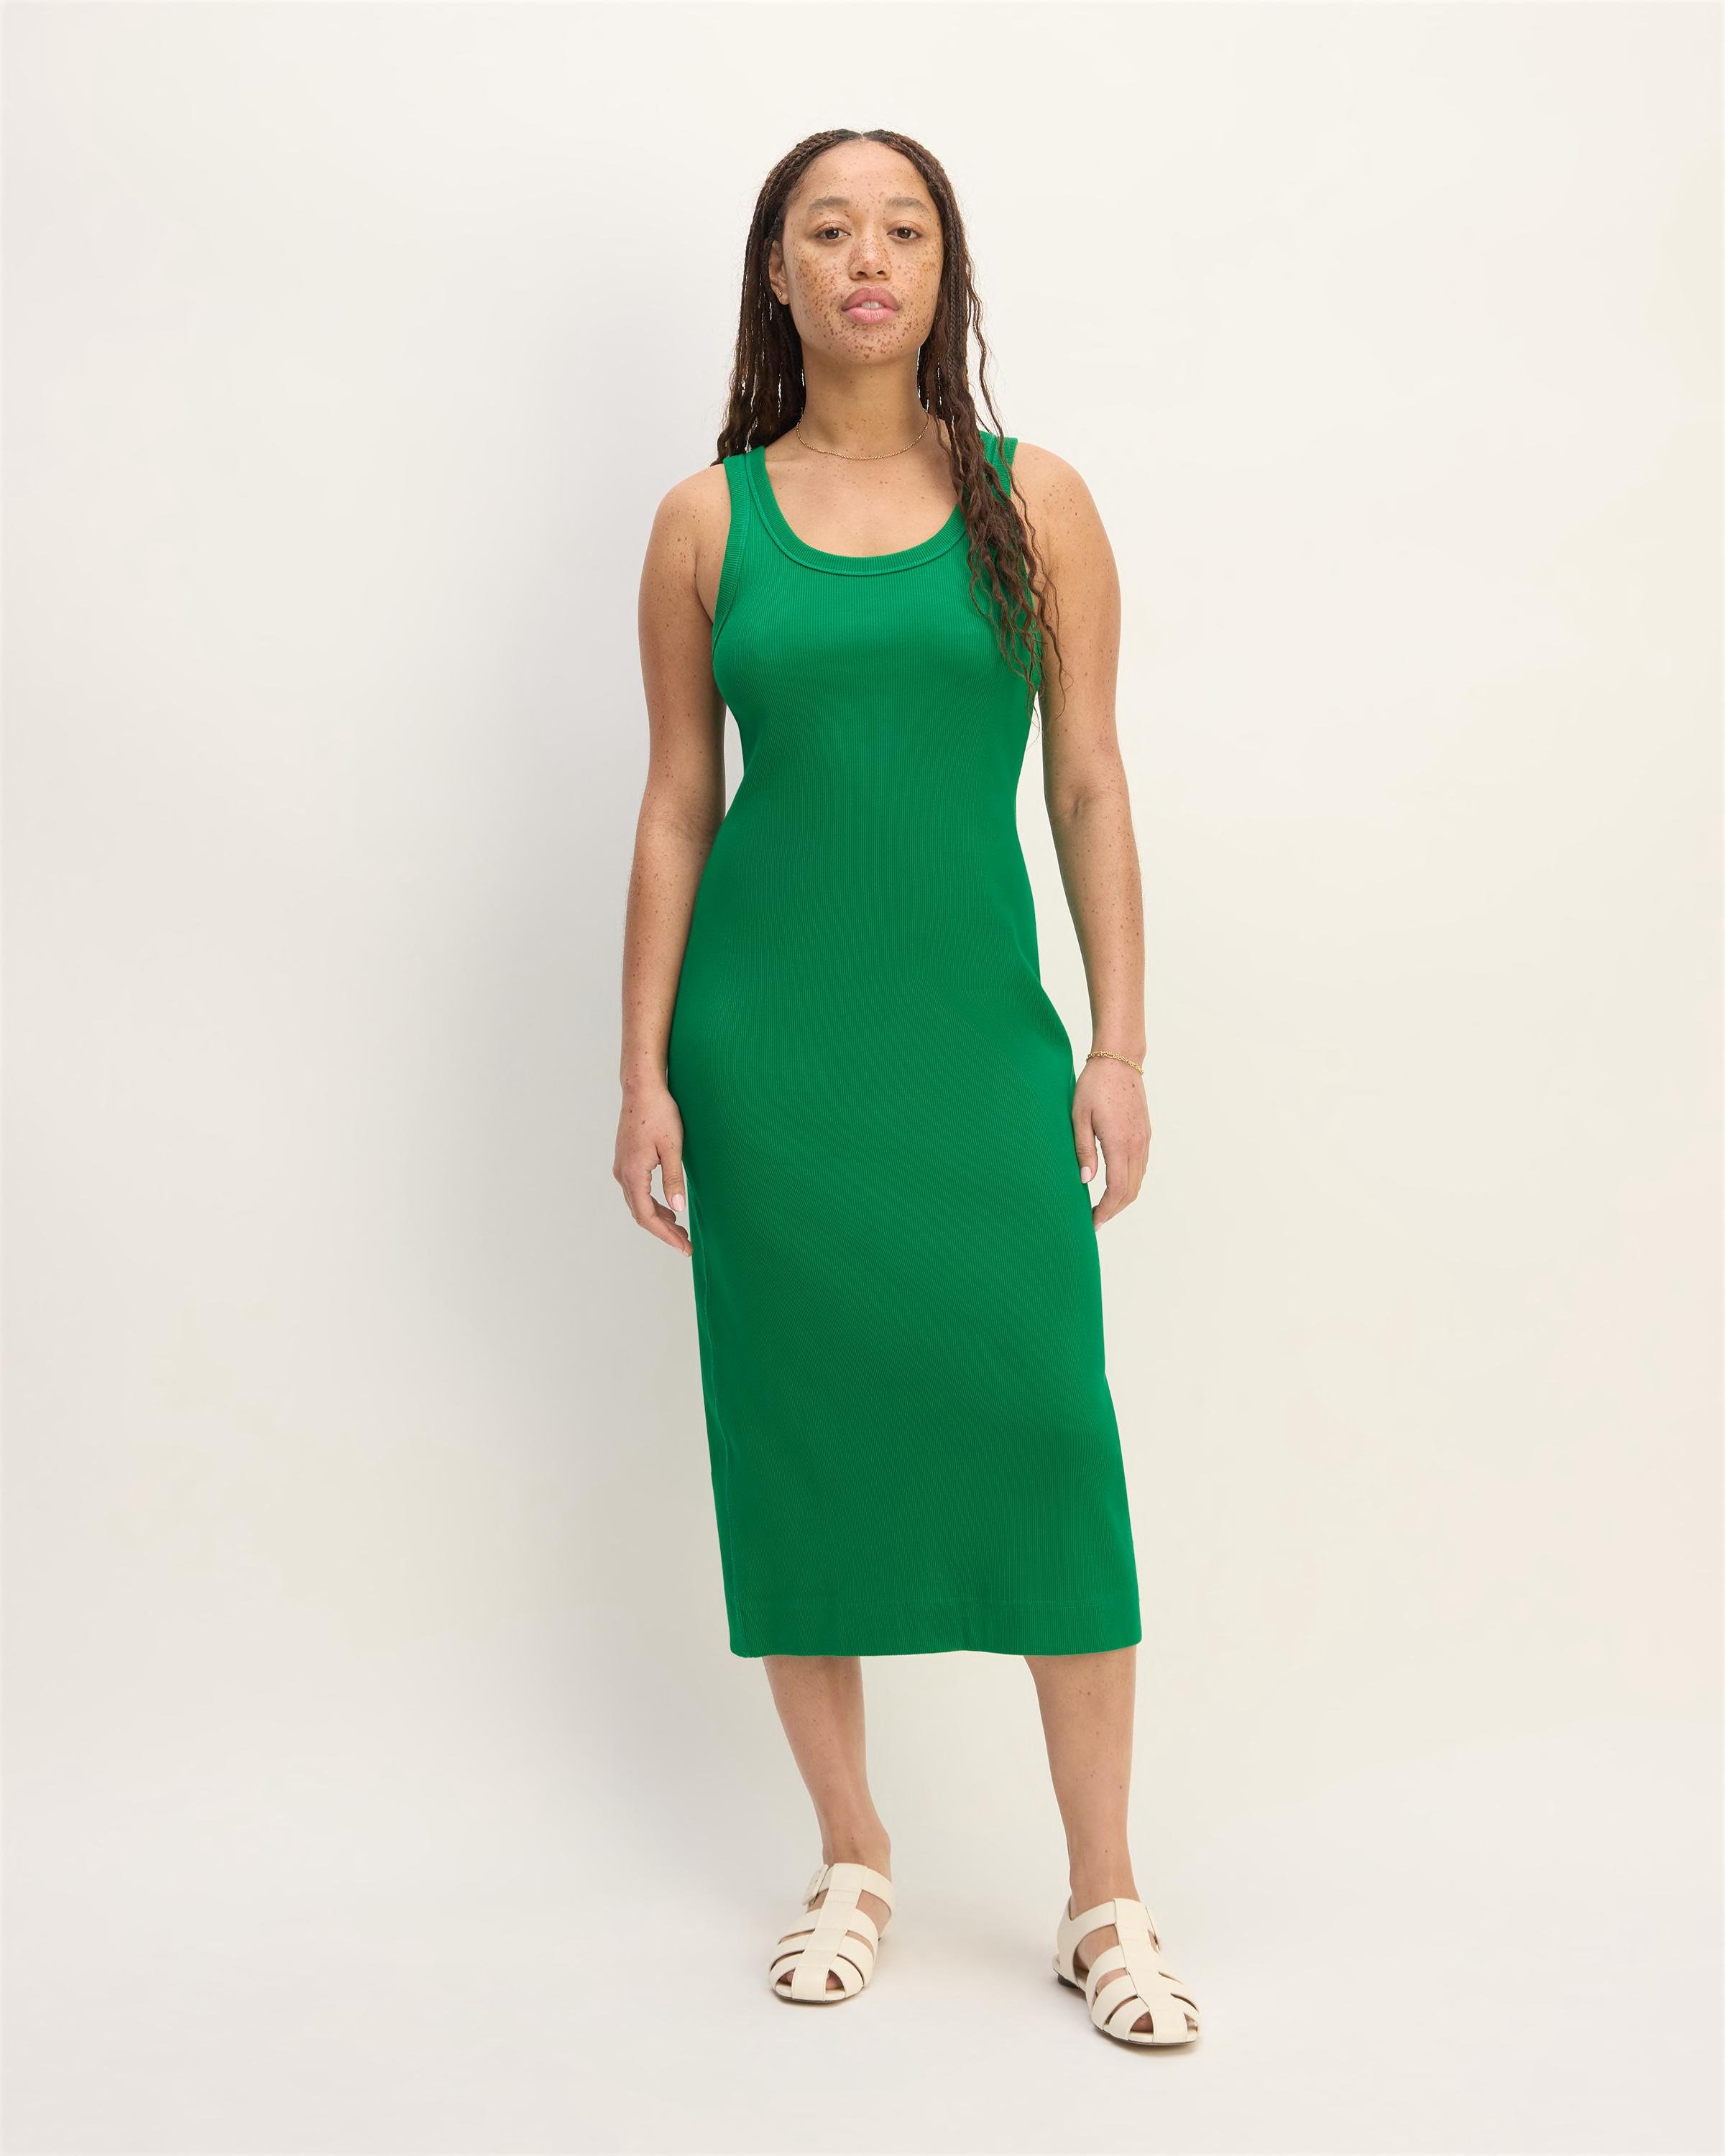 The Ribbed Tank Dress by EVERLANE